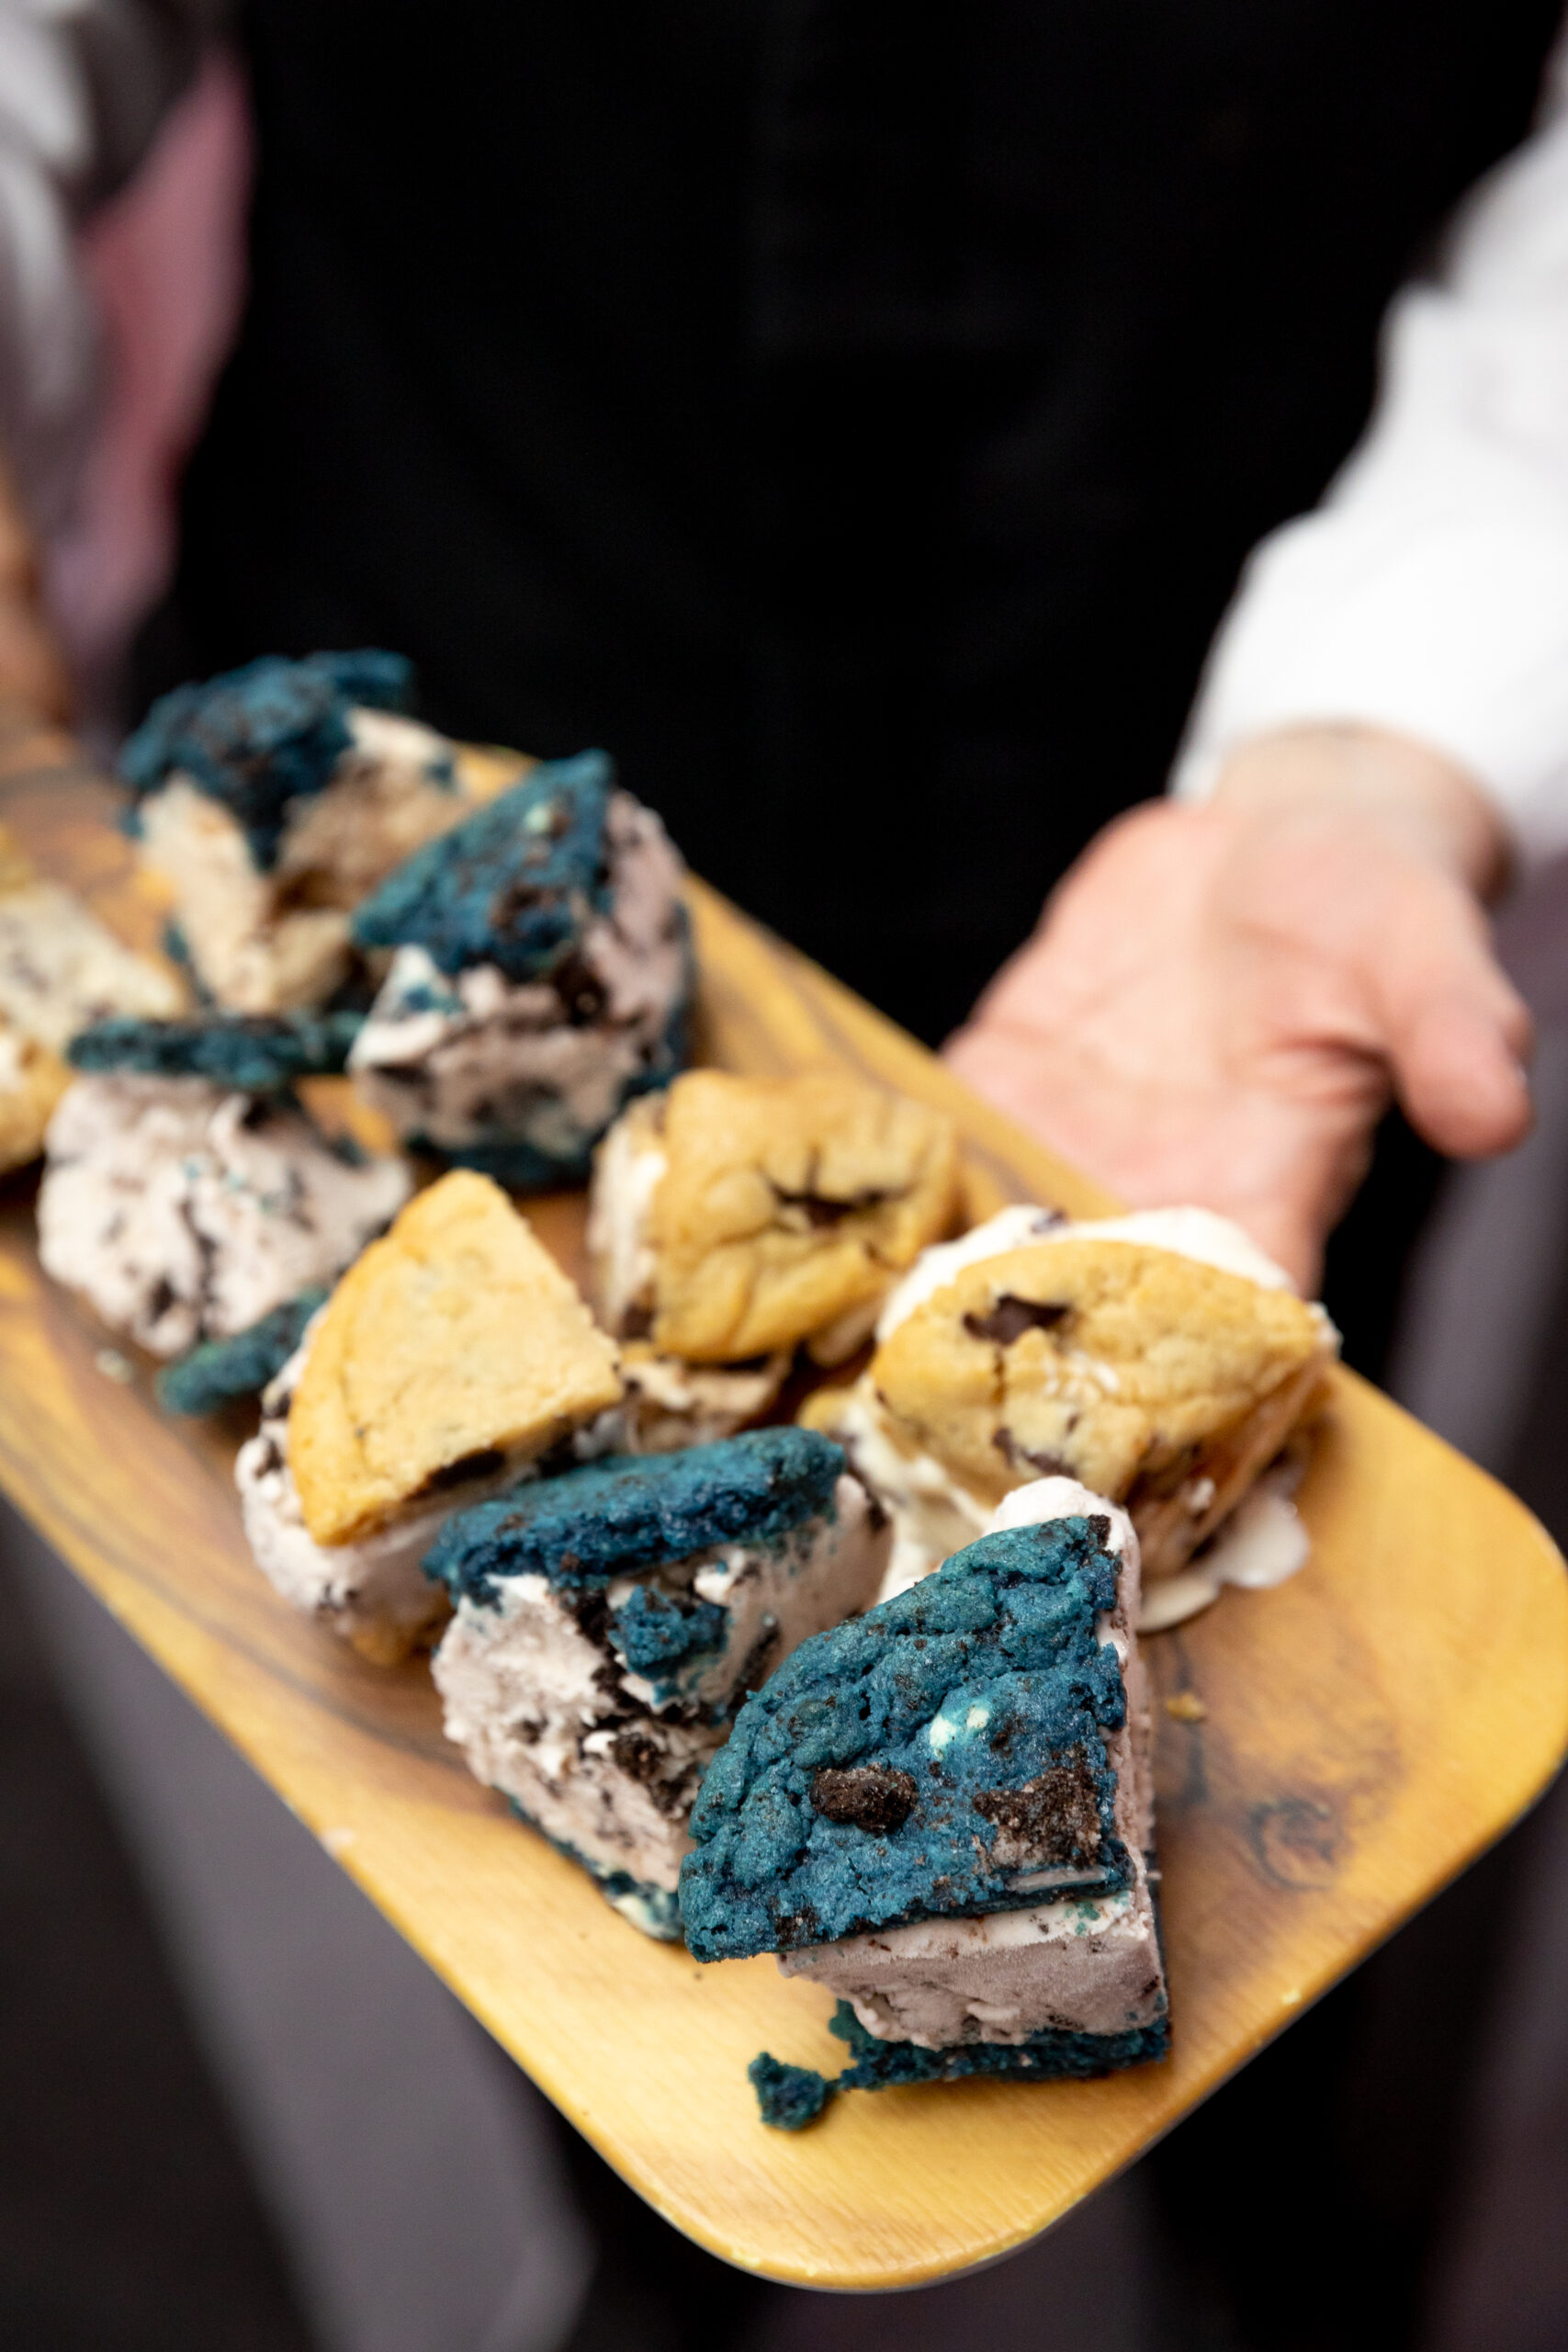 Passed cookie ice cream sandwiches at Phoebe's Belated Feminine Fairy Lights and Flowers Bat Mitzvah Party at Canopy Bethesda North | Pop Color Events | Adding a Pop of Color to Bar & Bat Mitzvahs in DC, MD & VA | Photo by: Jessica Latos Photography